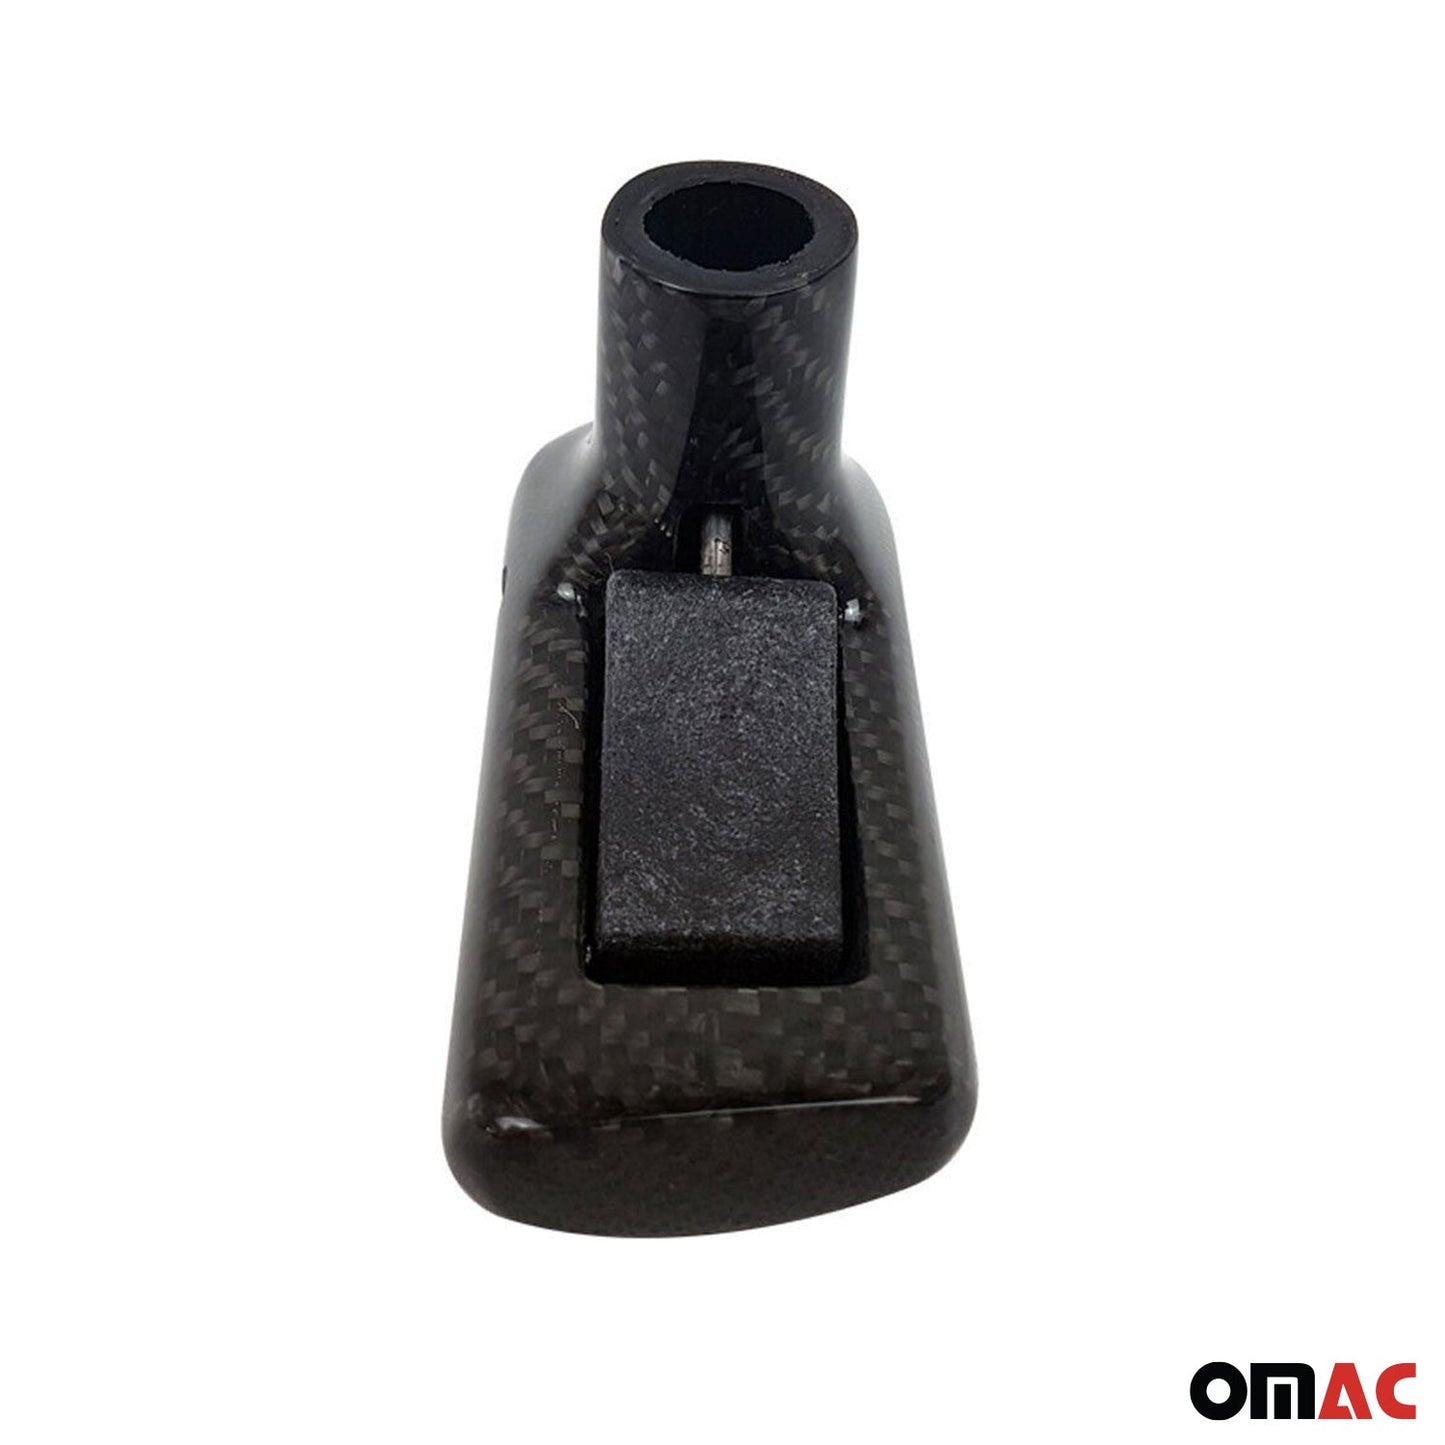 OMAC Gear Shift Knob for BMW E38 E39 E46 E60 E61 E63 E64 Carbon Automatic T-Handle A001770